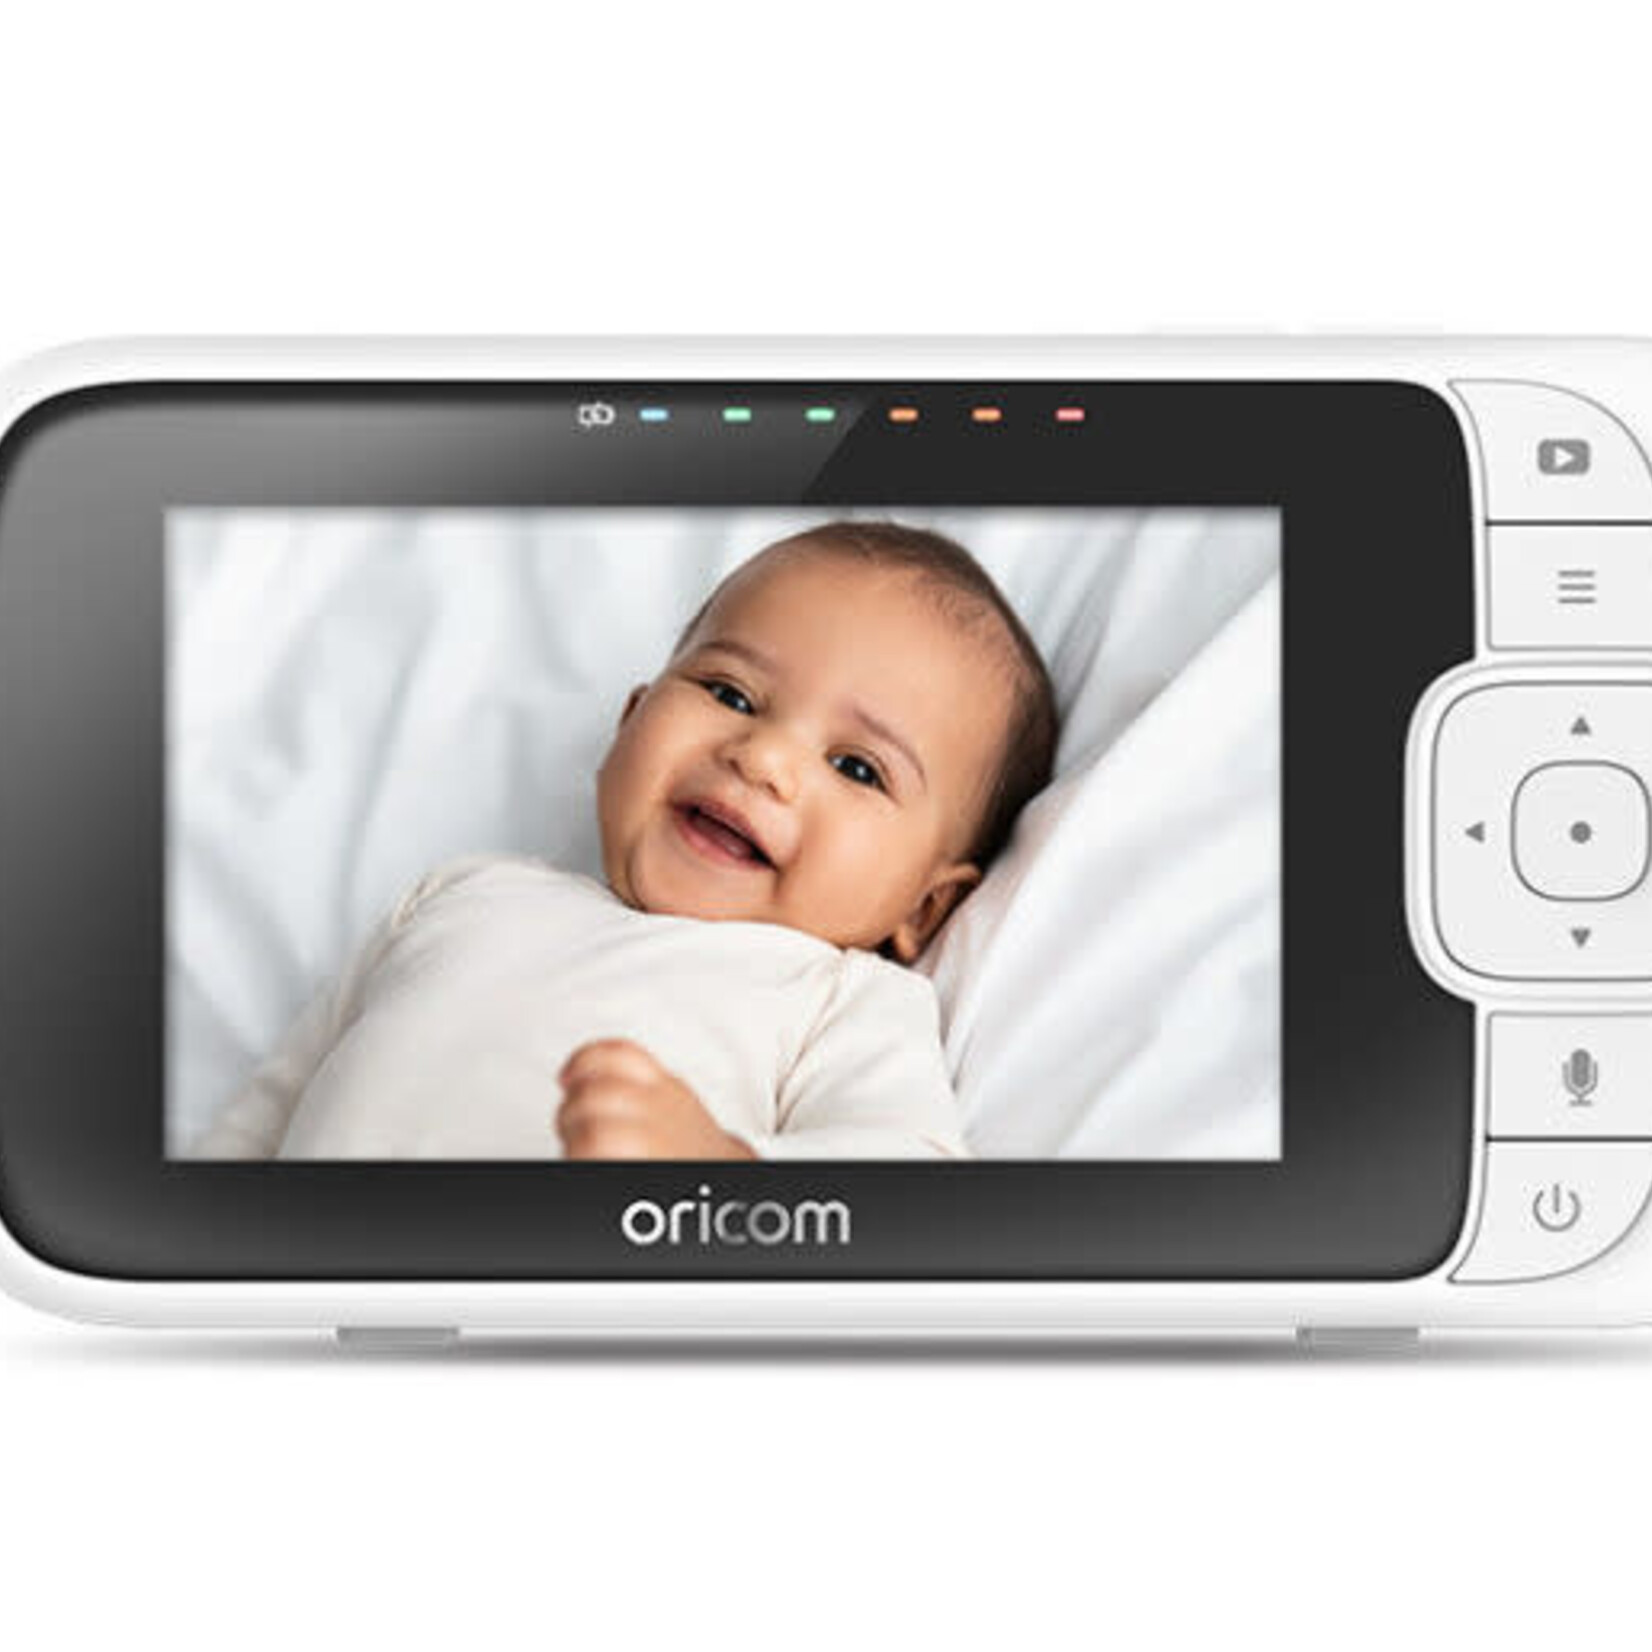 Oricom 4.3″ Smart HD Nursery Pal Skyview Baby Monitor with Cot Stand (OBH643P)